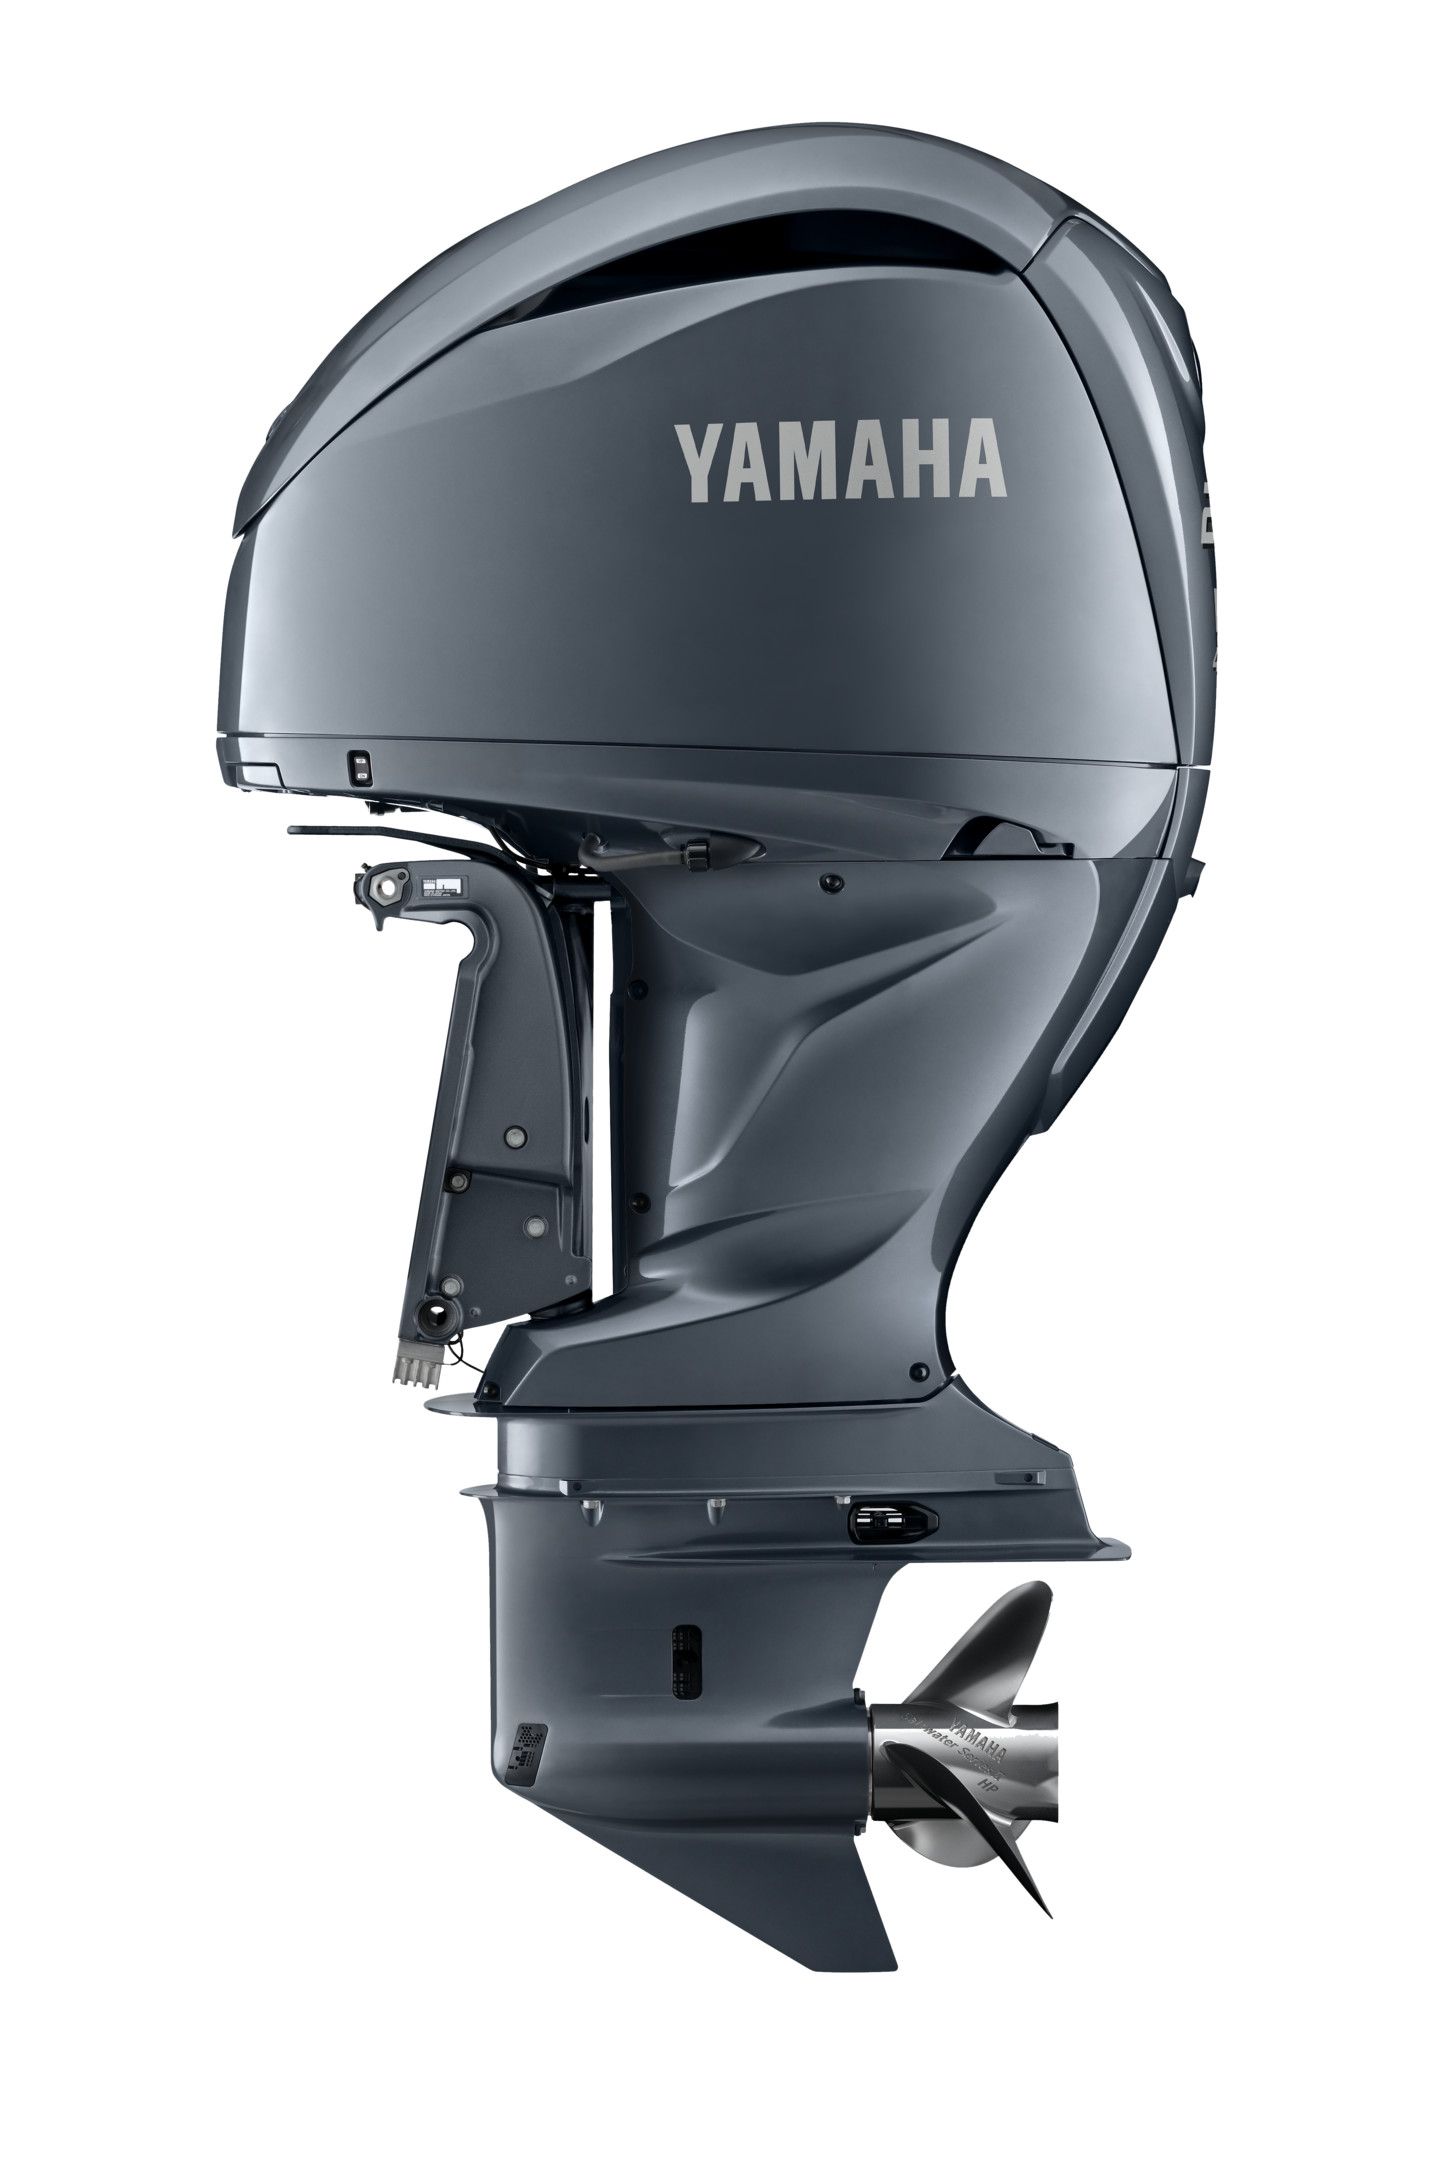 Yamaha Pearlescent White 4 Stroke 200hp Extra-Long Shaft EFI OUTBOARD FOR SALE